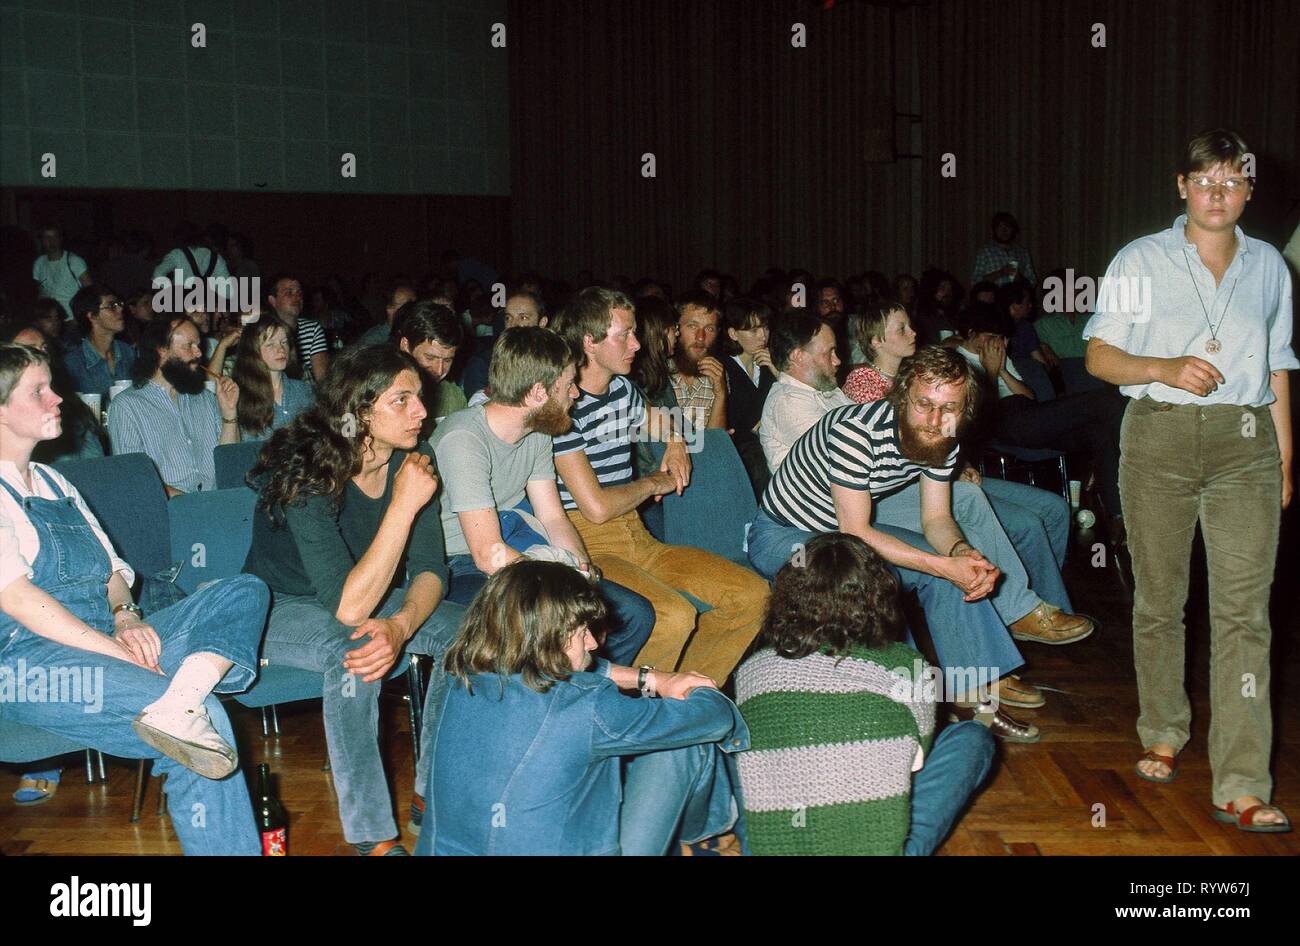 Young Germans attending a jazz concert at the 'Haus der Jungen Talente' (House of Young Talents) in East Berlin. In the 1980s, the house became a major venue for avant-garde jazz, thanks in particular to its 'Jazz im keller' concert series. 1982 Stock Photo